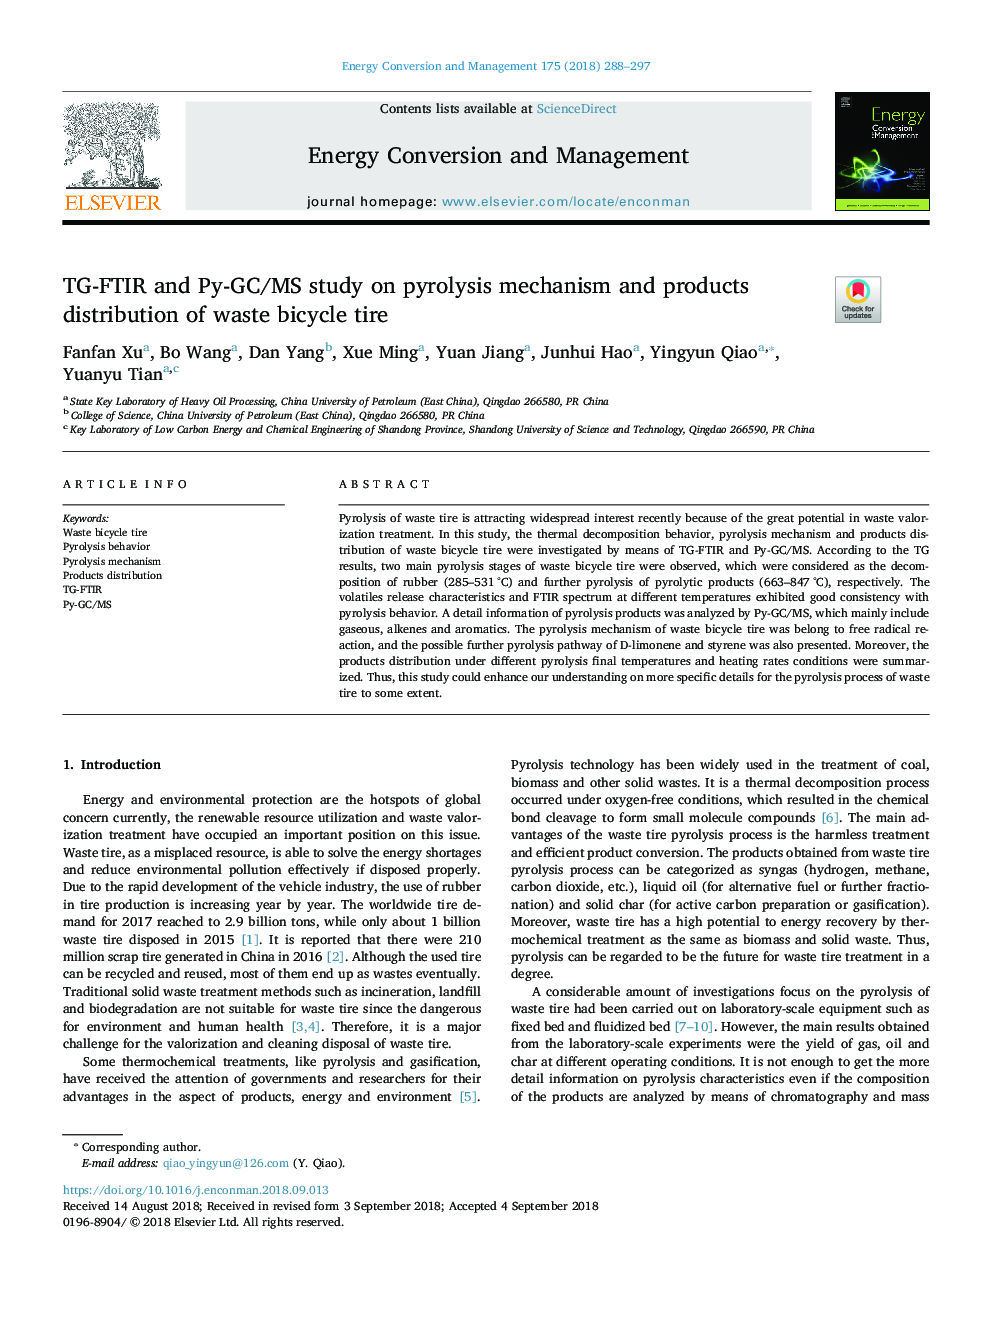 TG-FTIR and Py-GC/MS study on pyrolysis mechanism and products distribution of waste bicycle tire